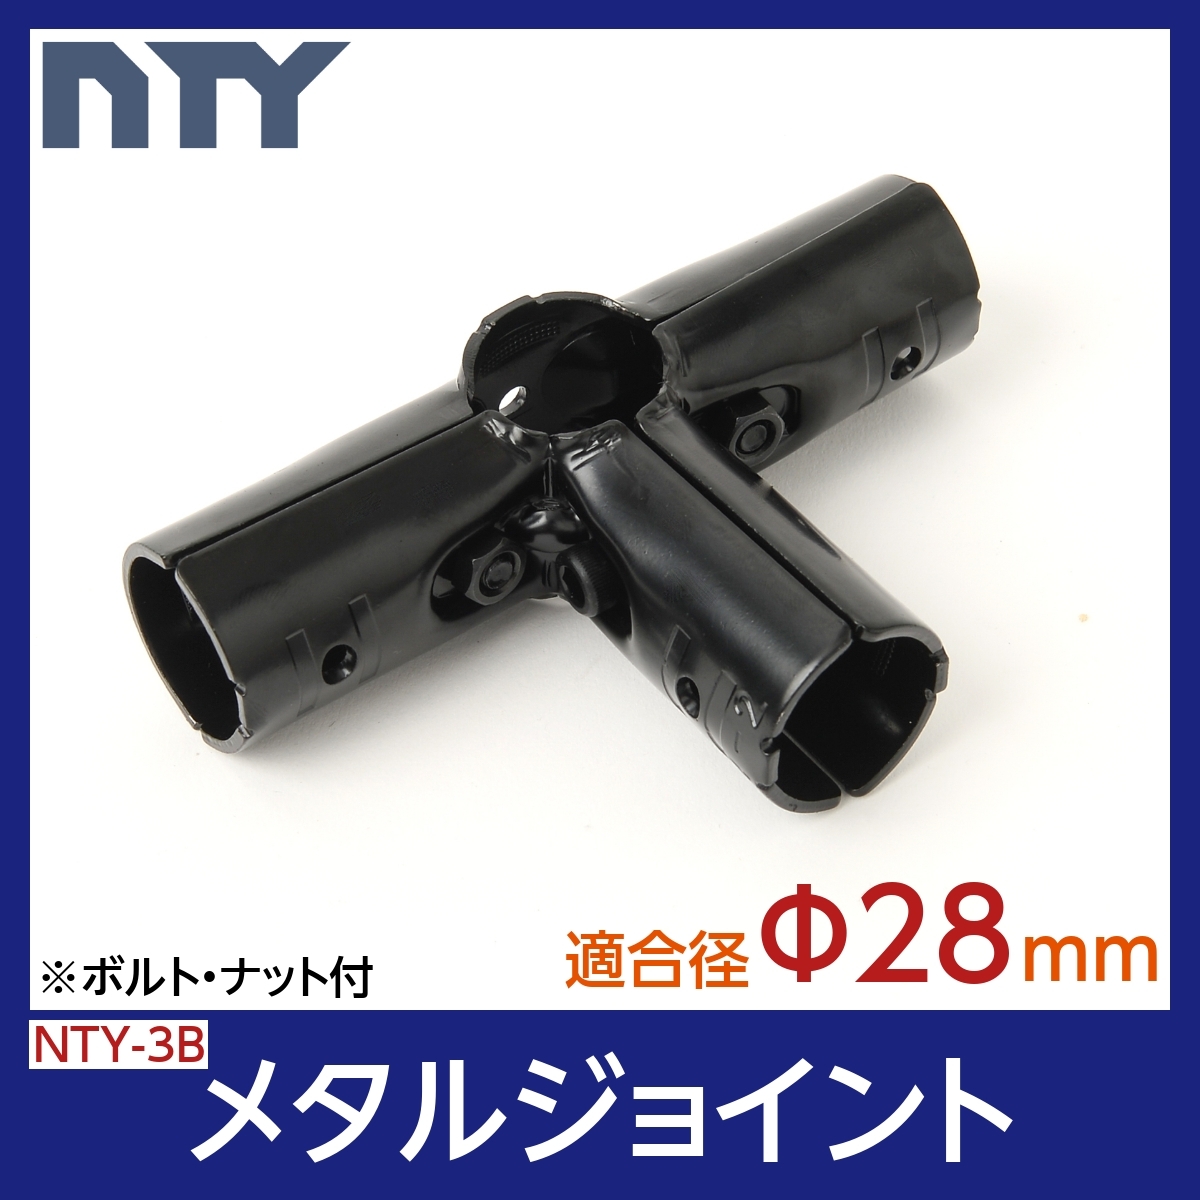 NTY metal joint NTY-3B black Φ28mm for (irekta- metal joint. HJ-3. compatibility equipped ) assembly pipe joint coupling joint DIY shelves rack 